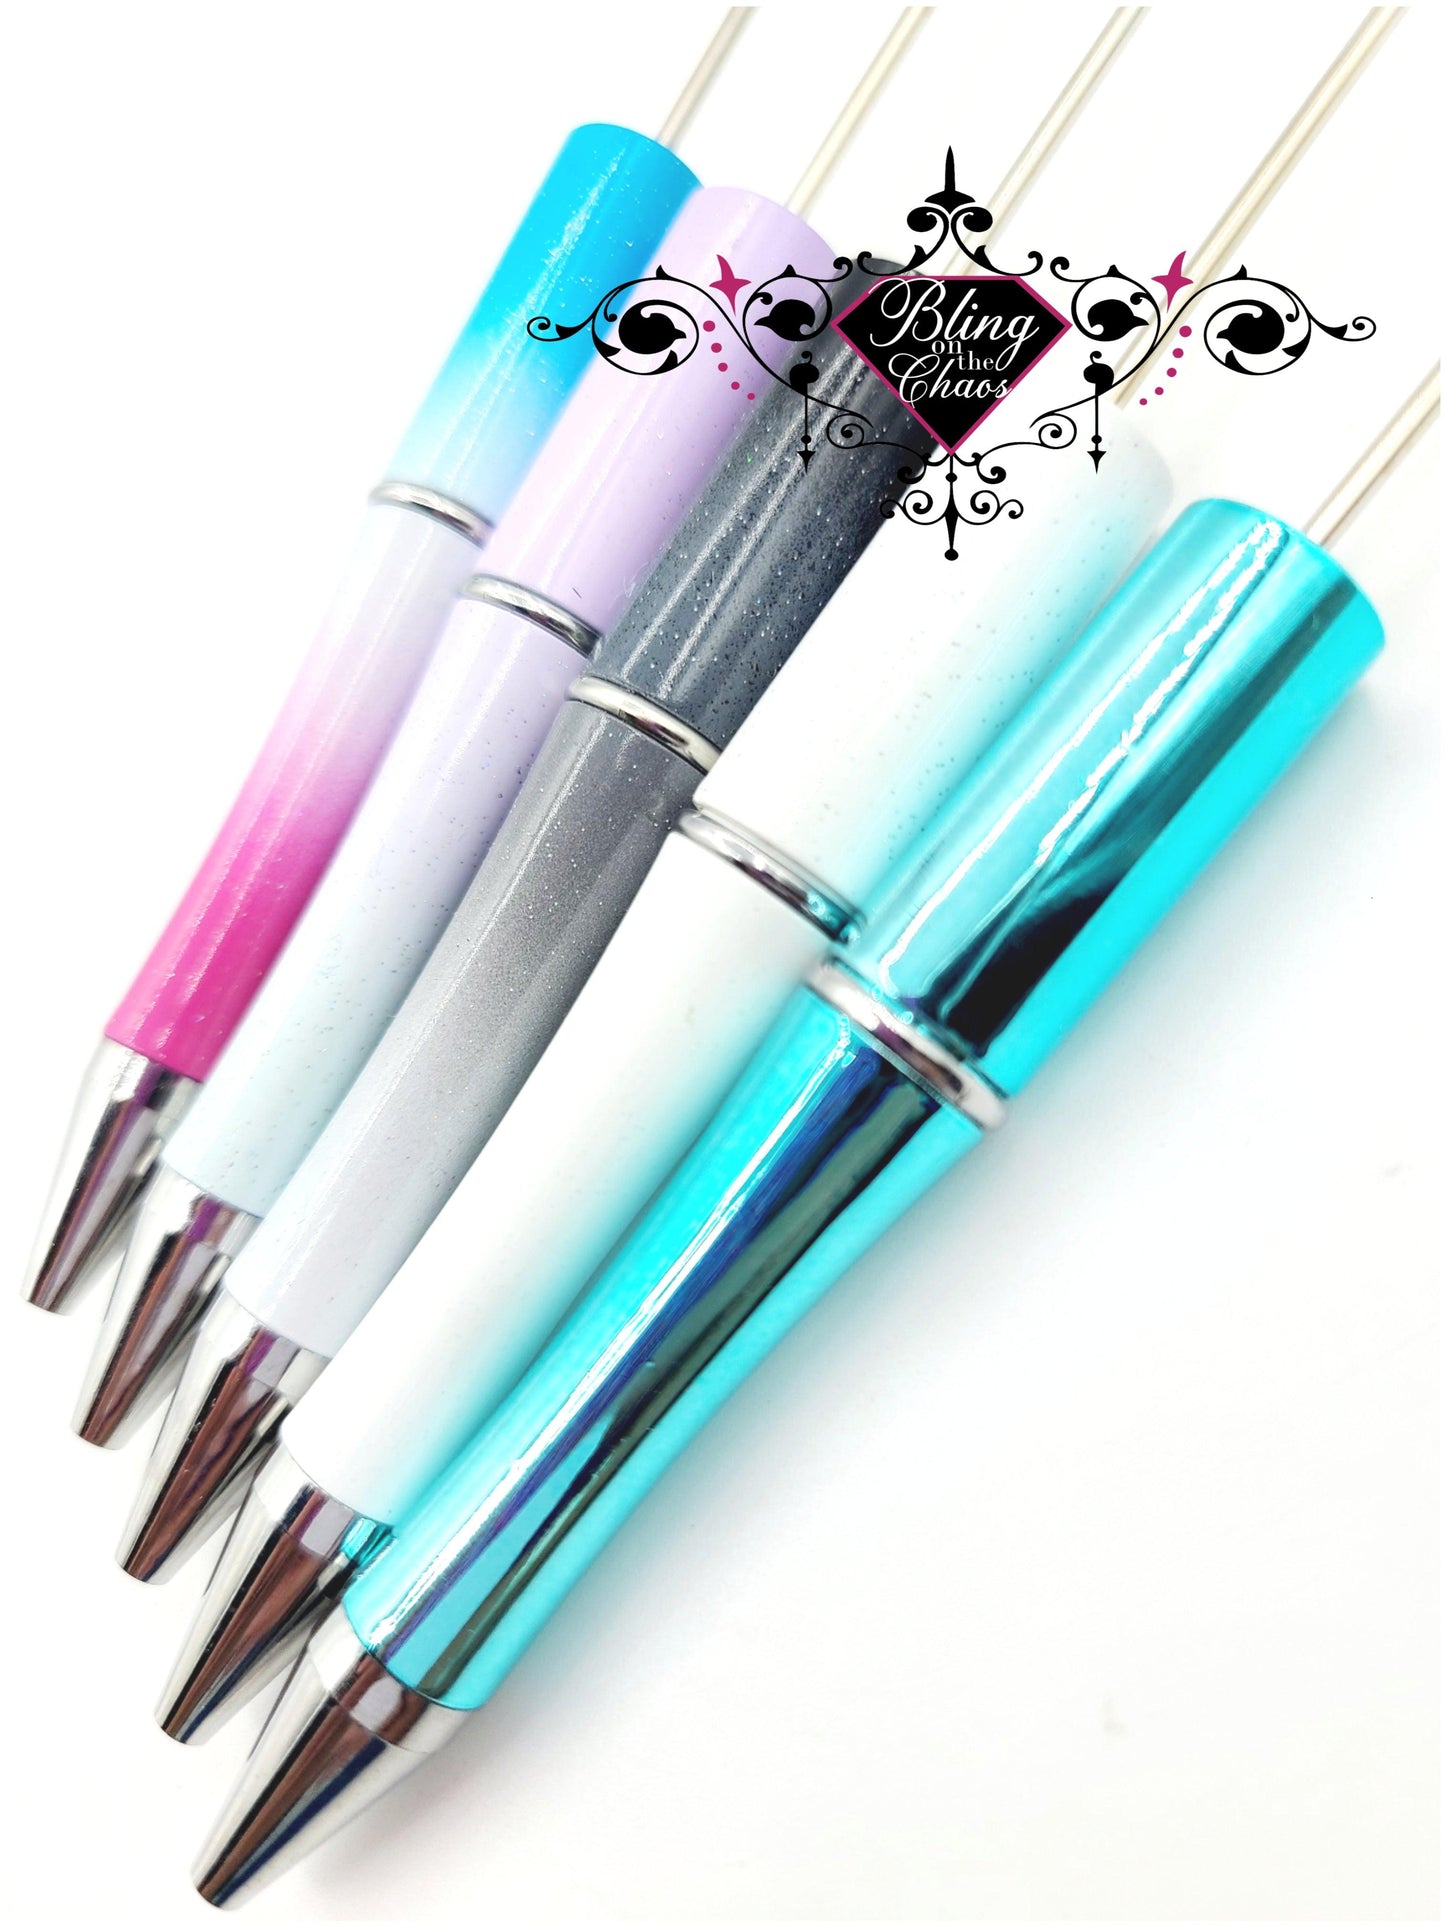 Beadable Pen Blank-Bling on the Chaos